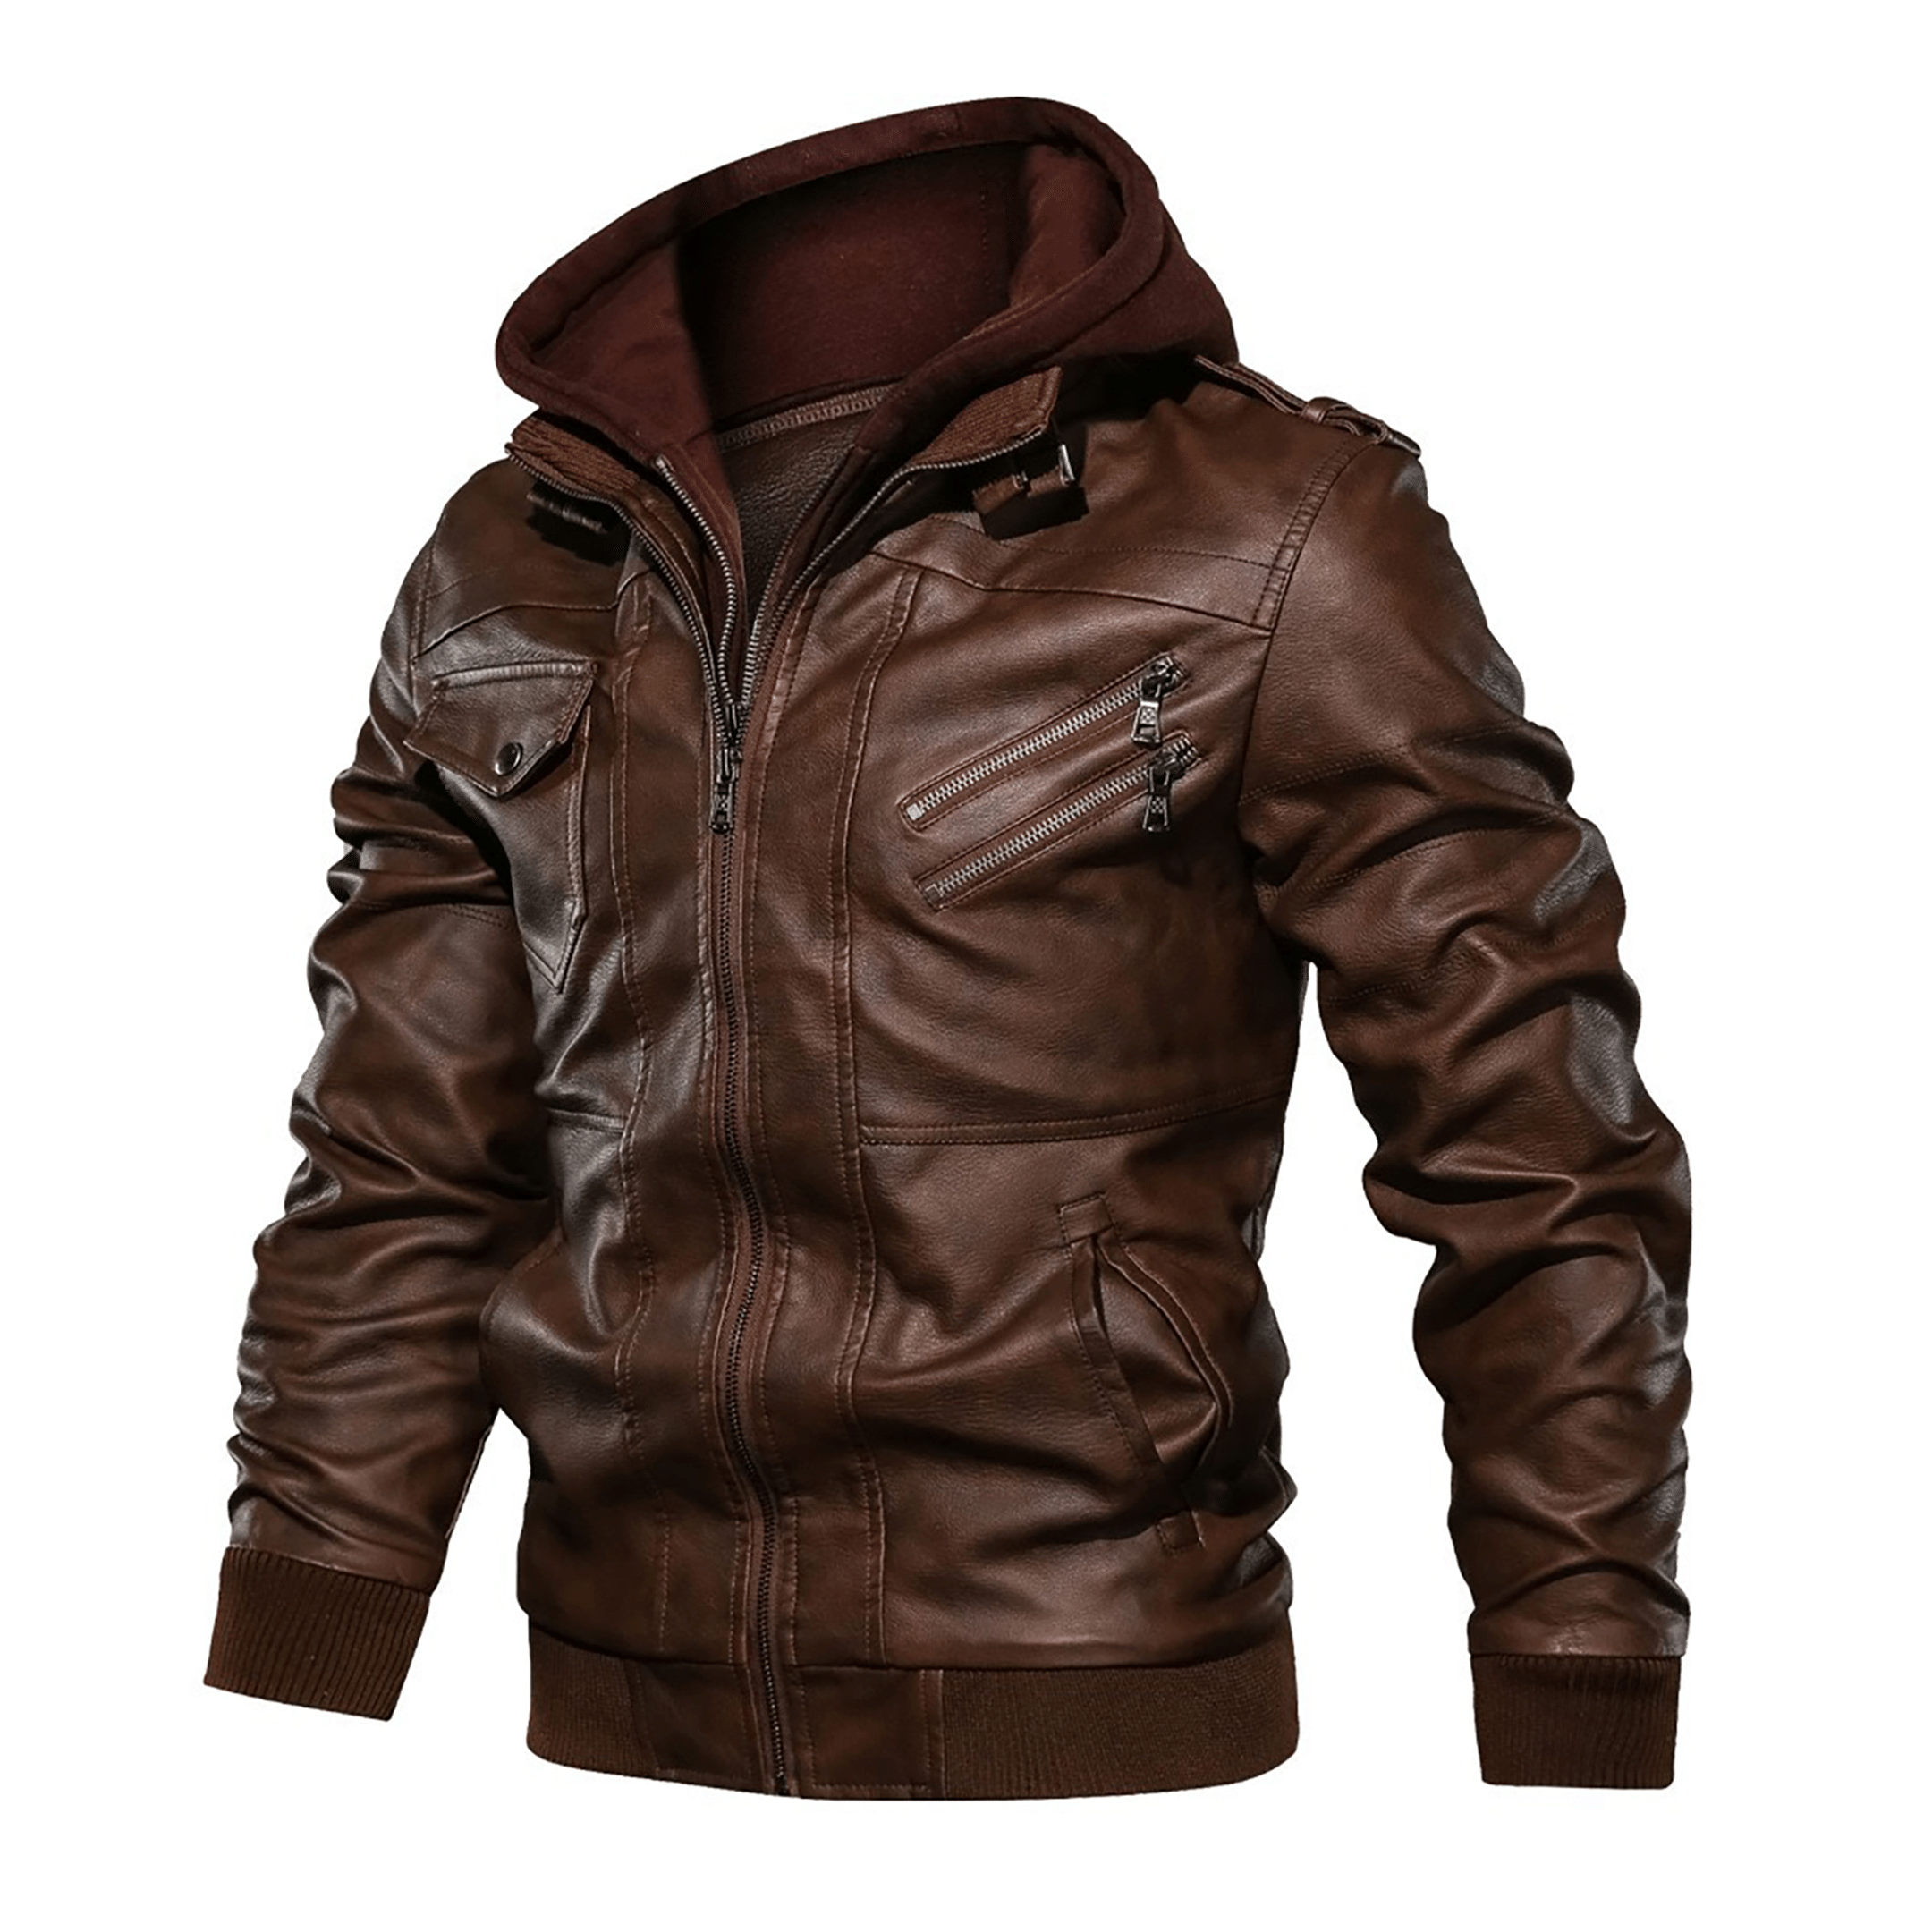 Top leather jackets and latest products 431